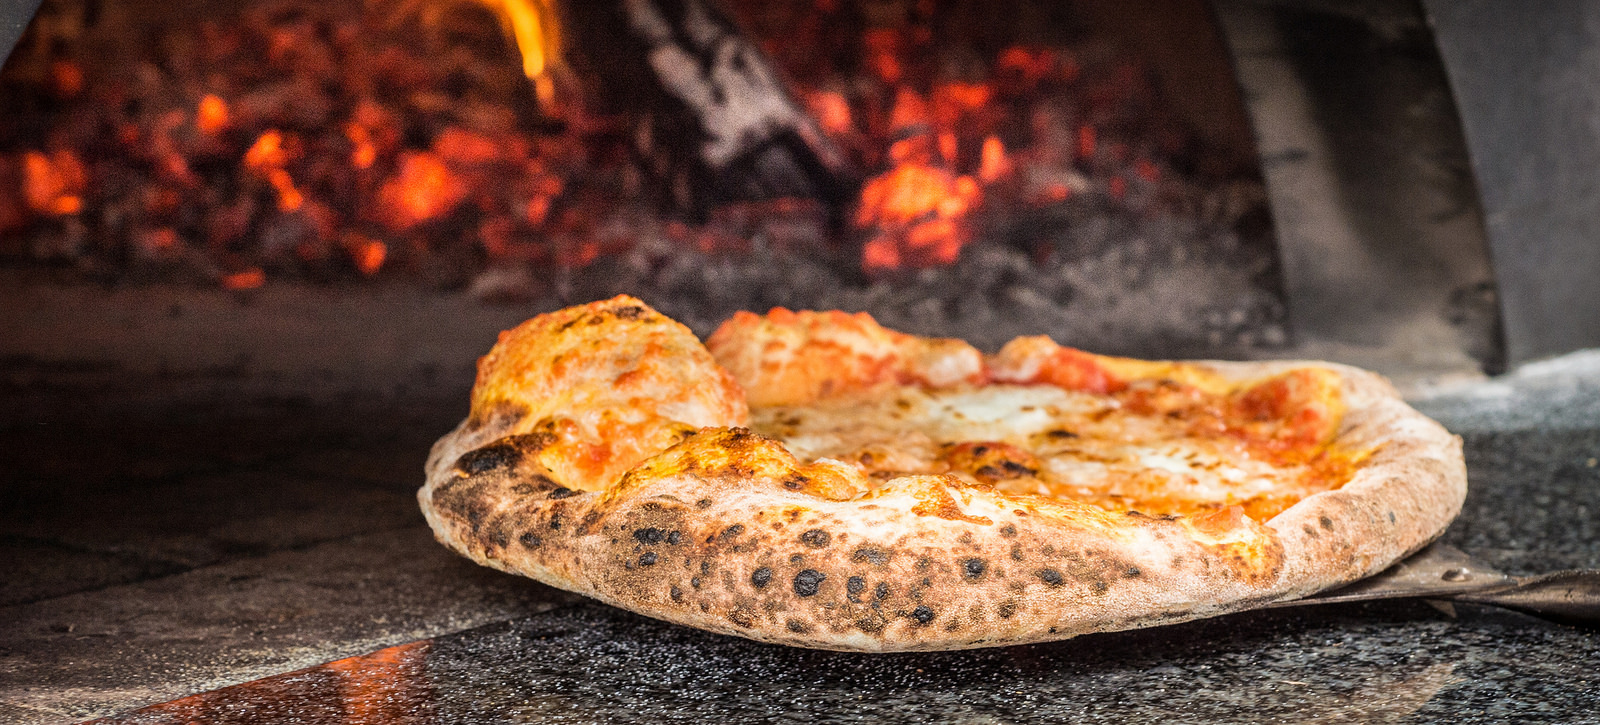 What to Cook in an Outdoor Wood-Burning Pizza Oven